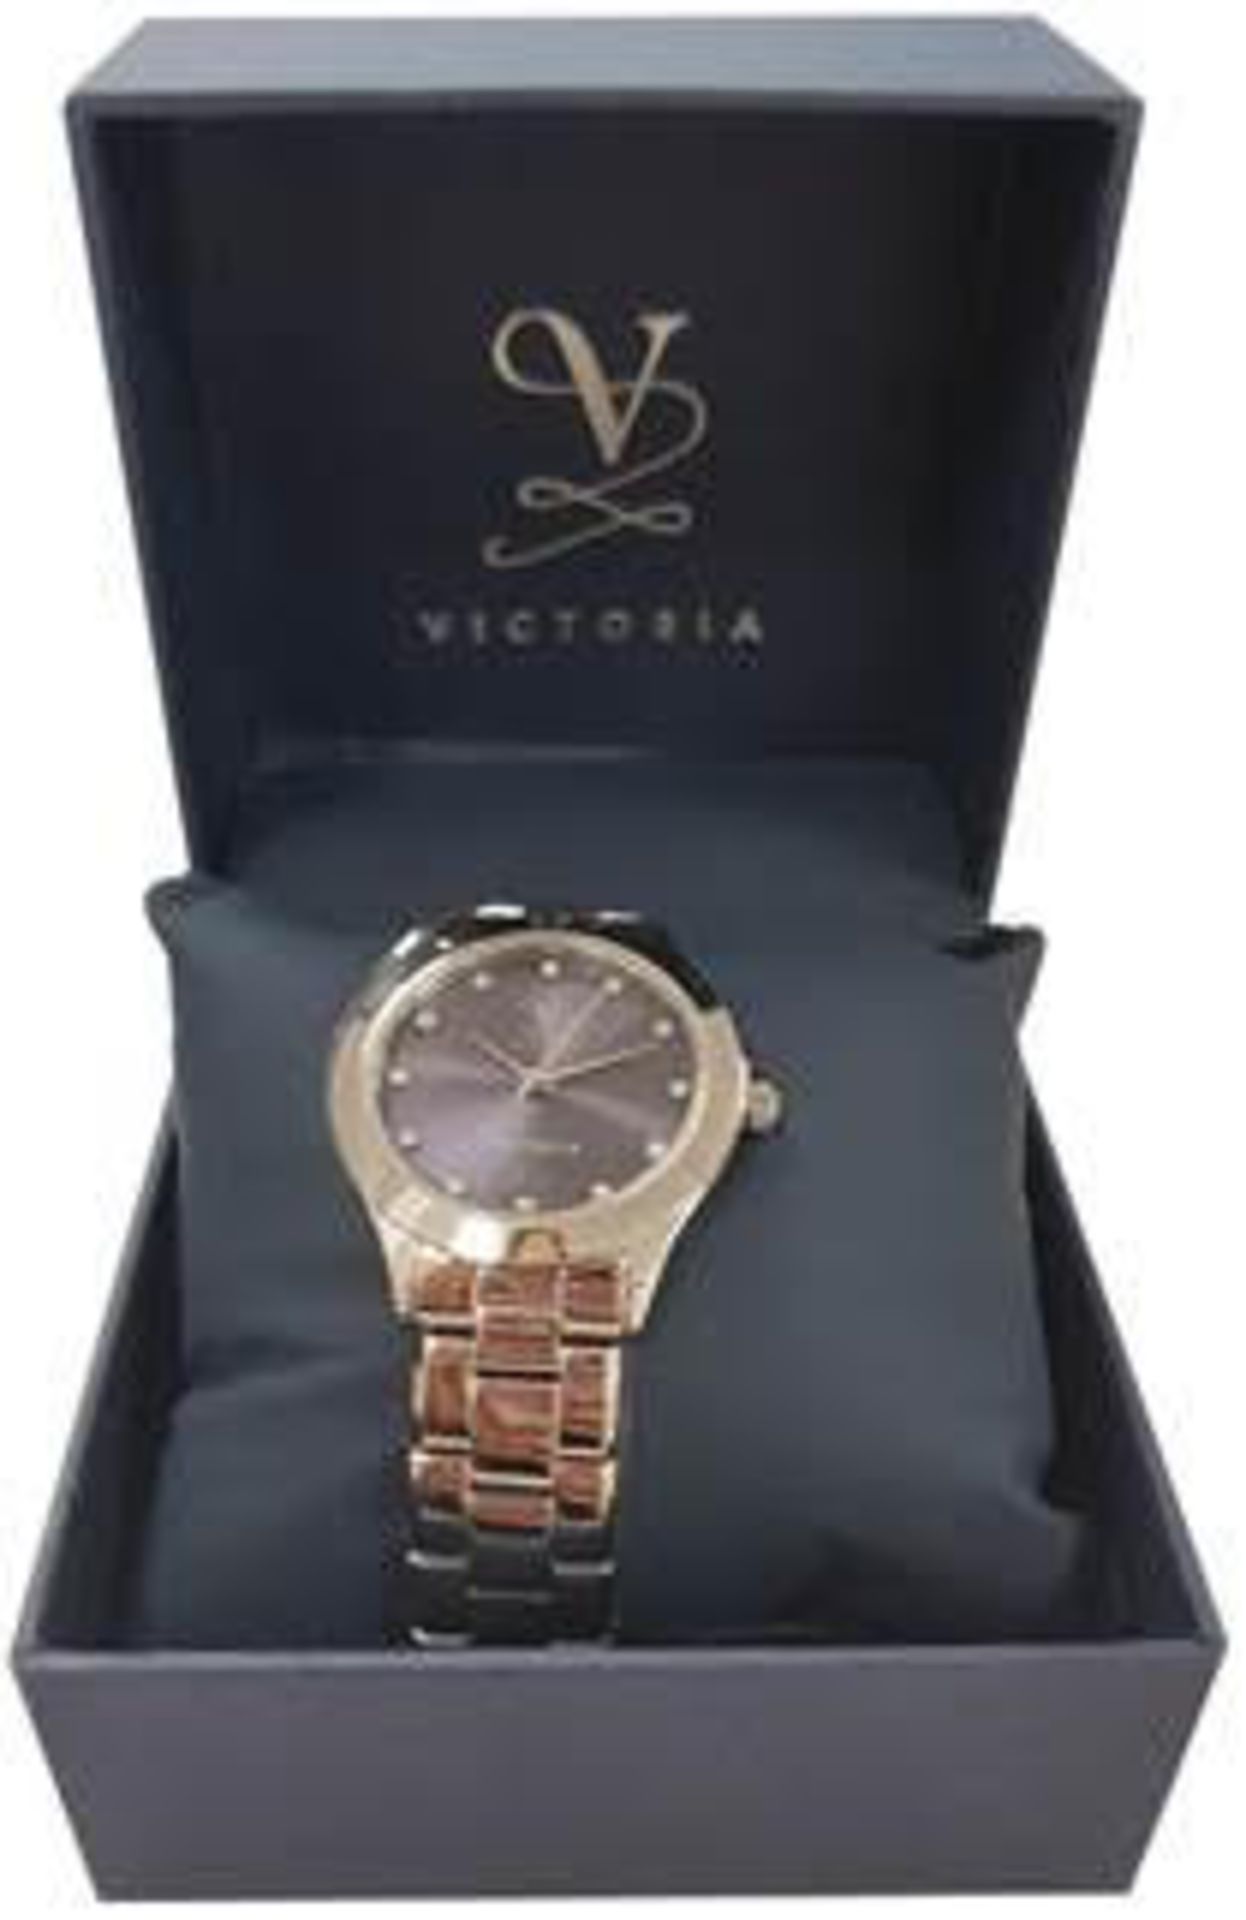 V *TRADE QTY* Brand New Ladies Victoria Stainless Steel Watch With Bracelet Strap - Navy Face - - Image 2 of 3